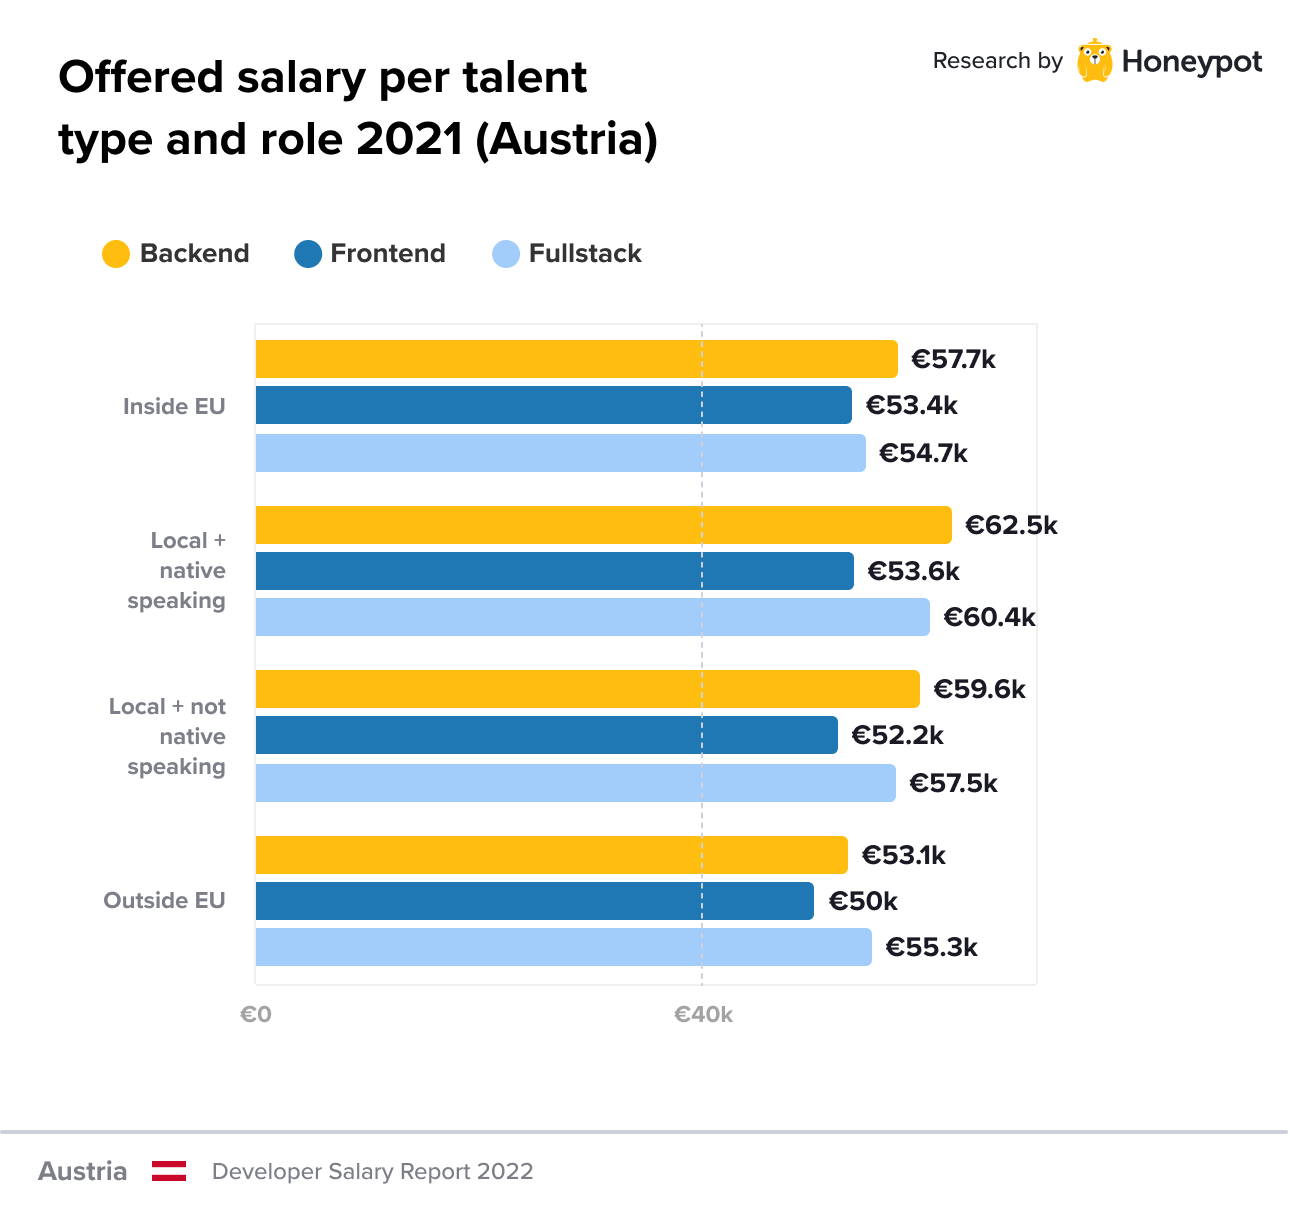 Offered salary per talent type and role 2021 (Austria)